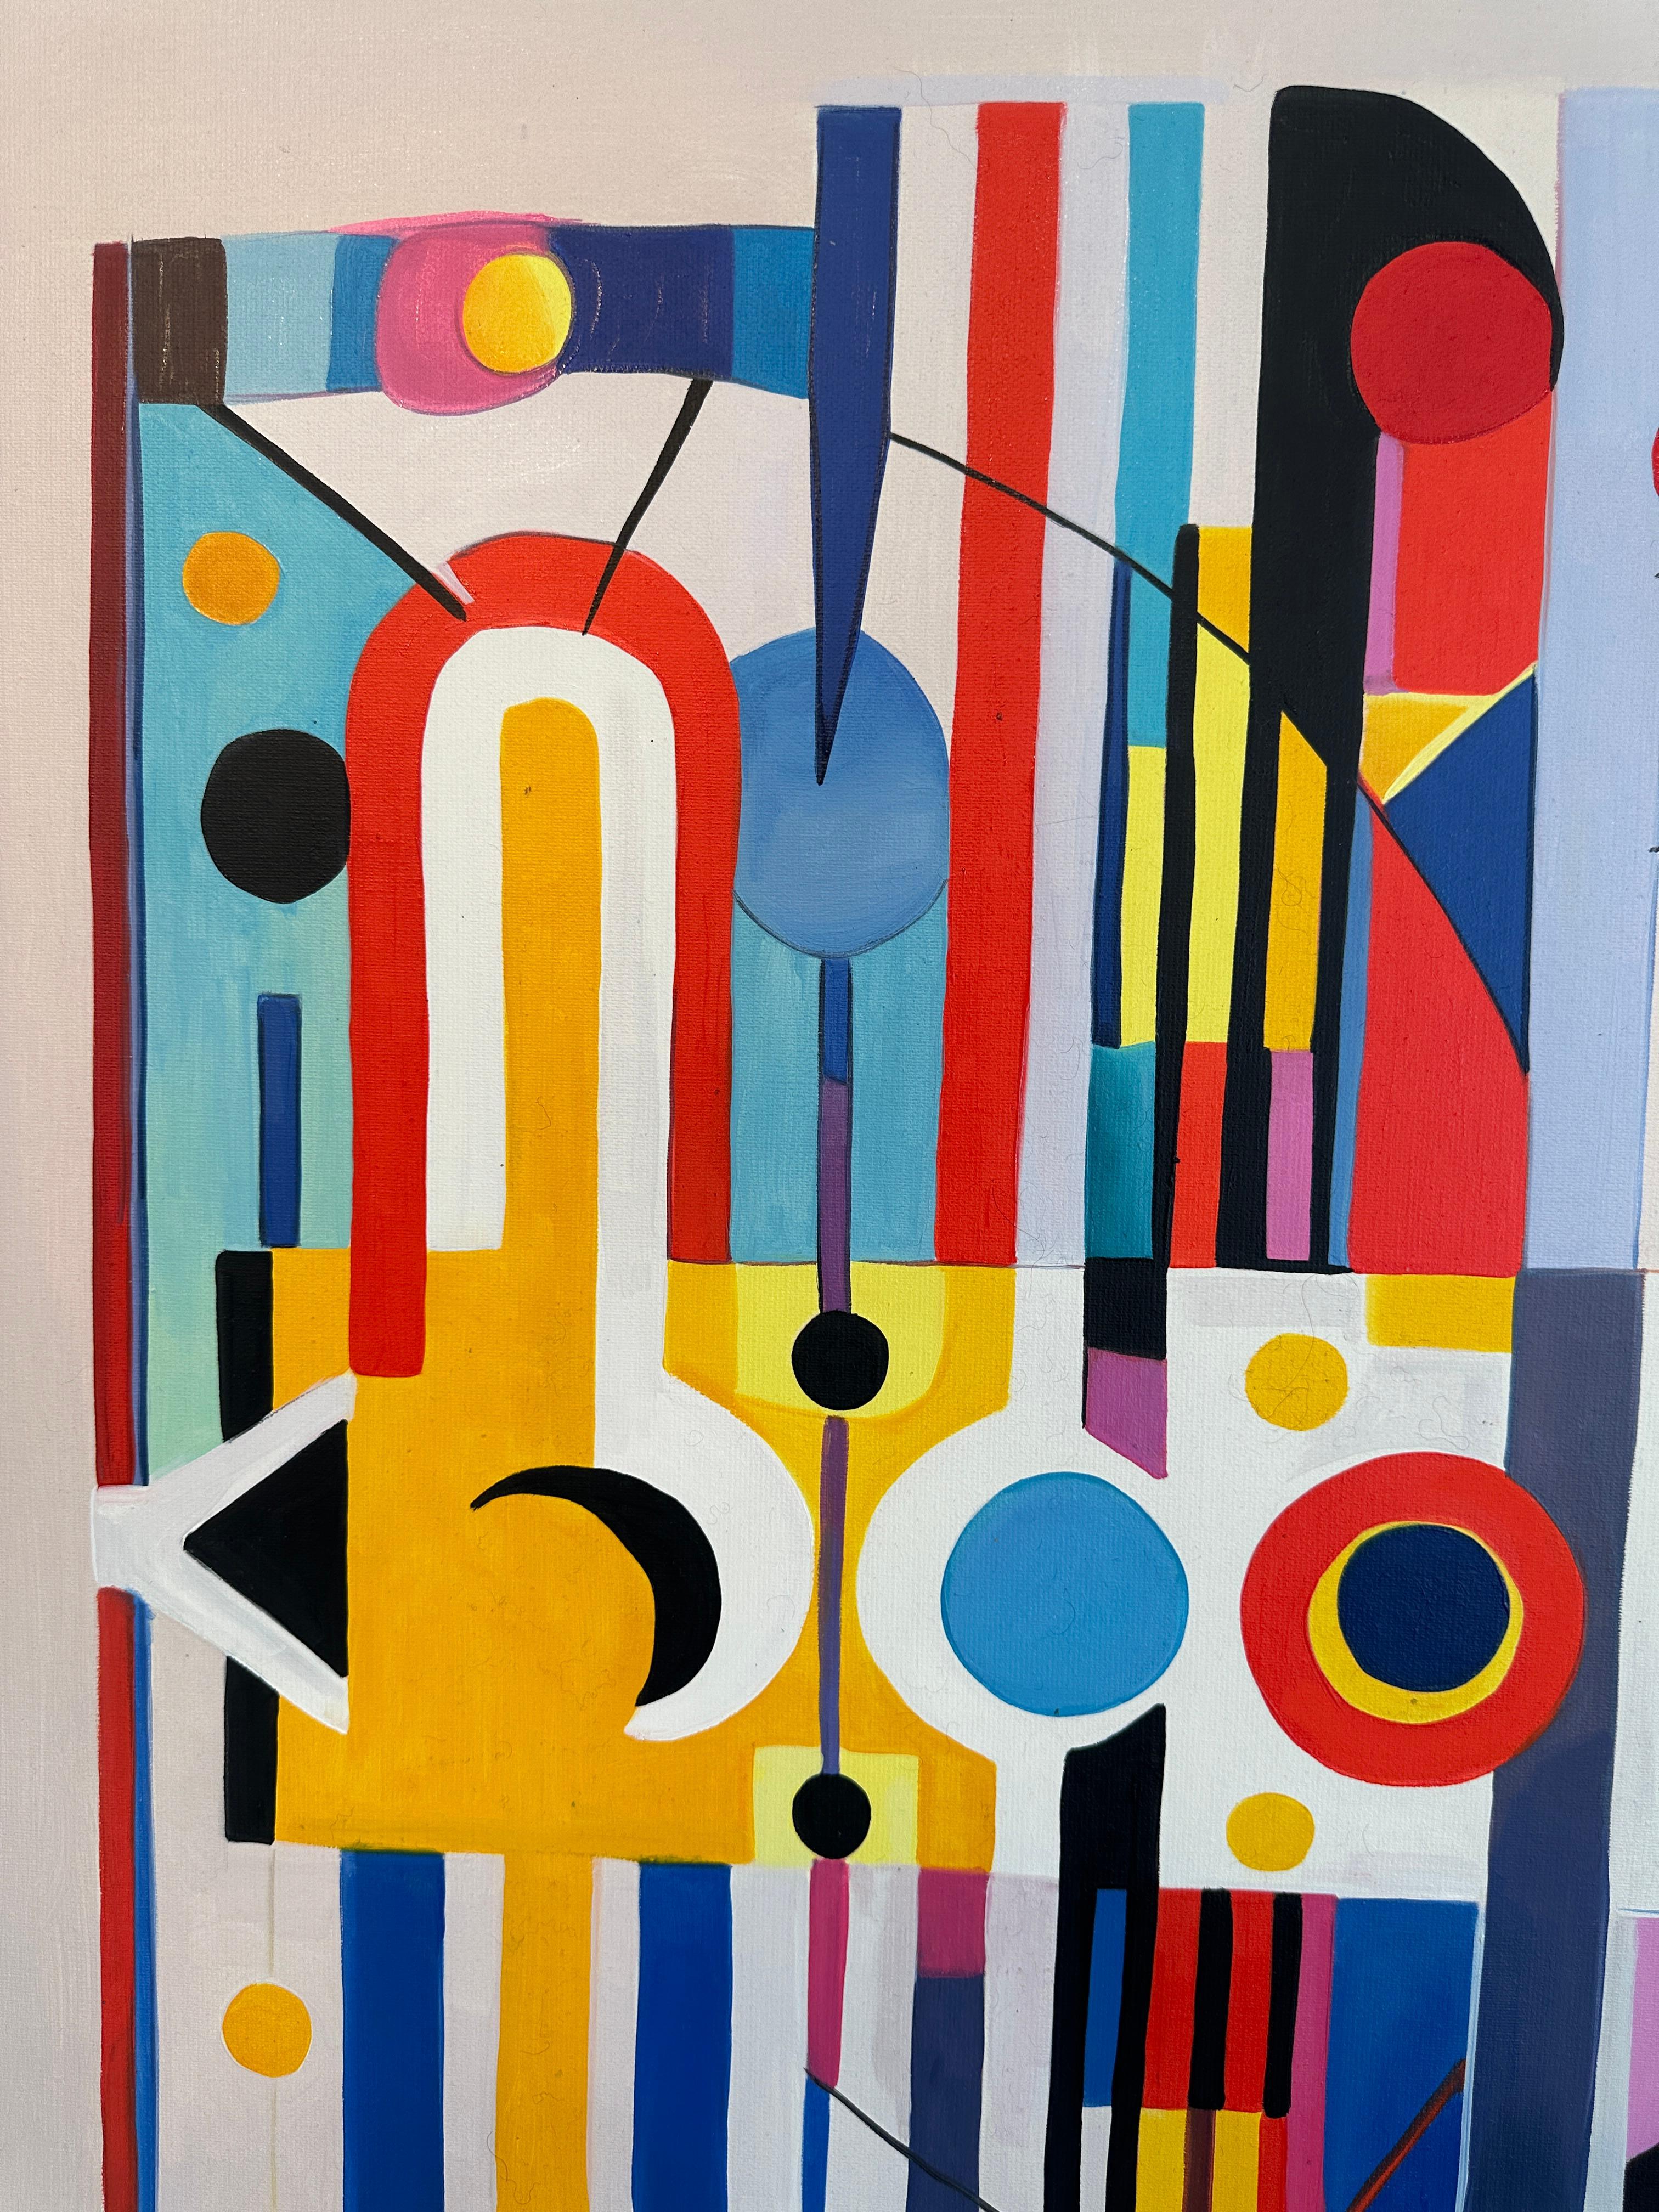 I wasn't expecting yóu - Contemporary geometric abstraction - Oil Painting For Sale 4